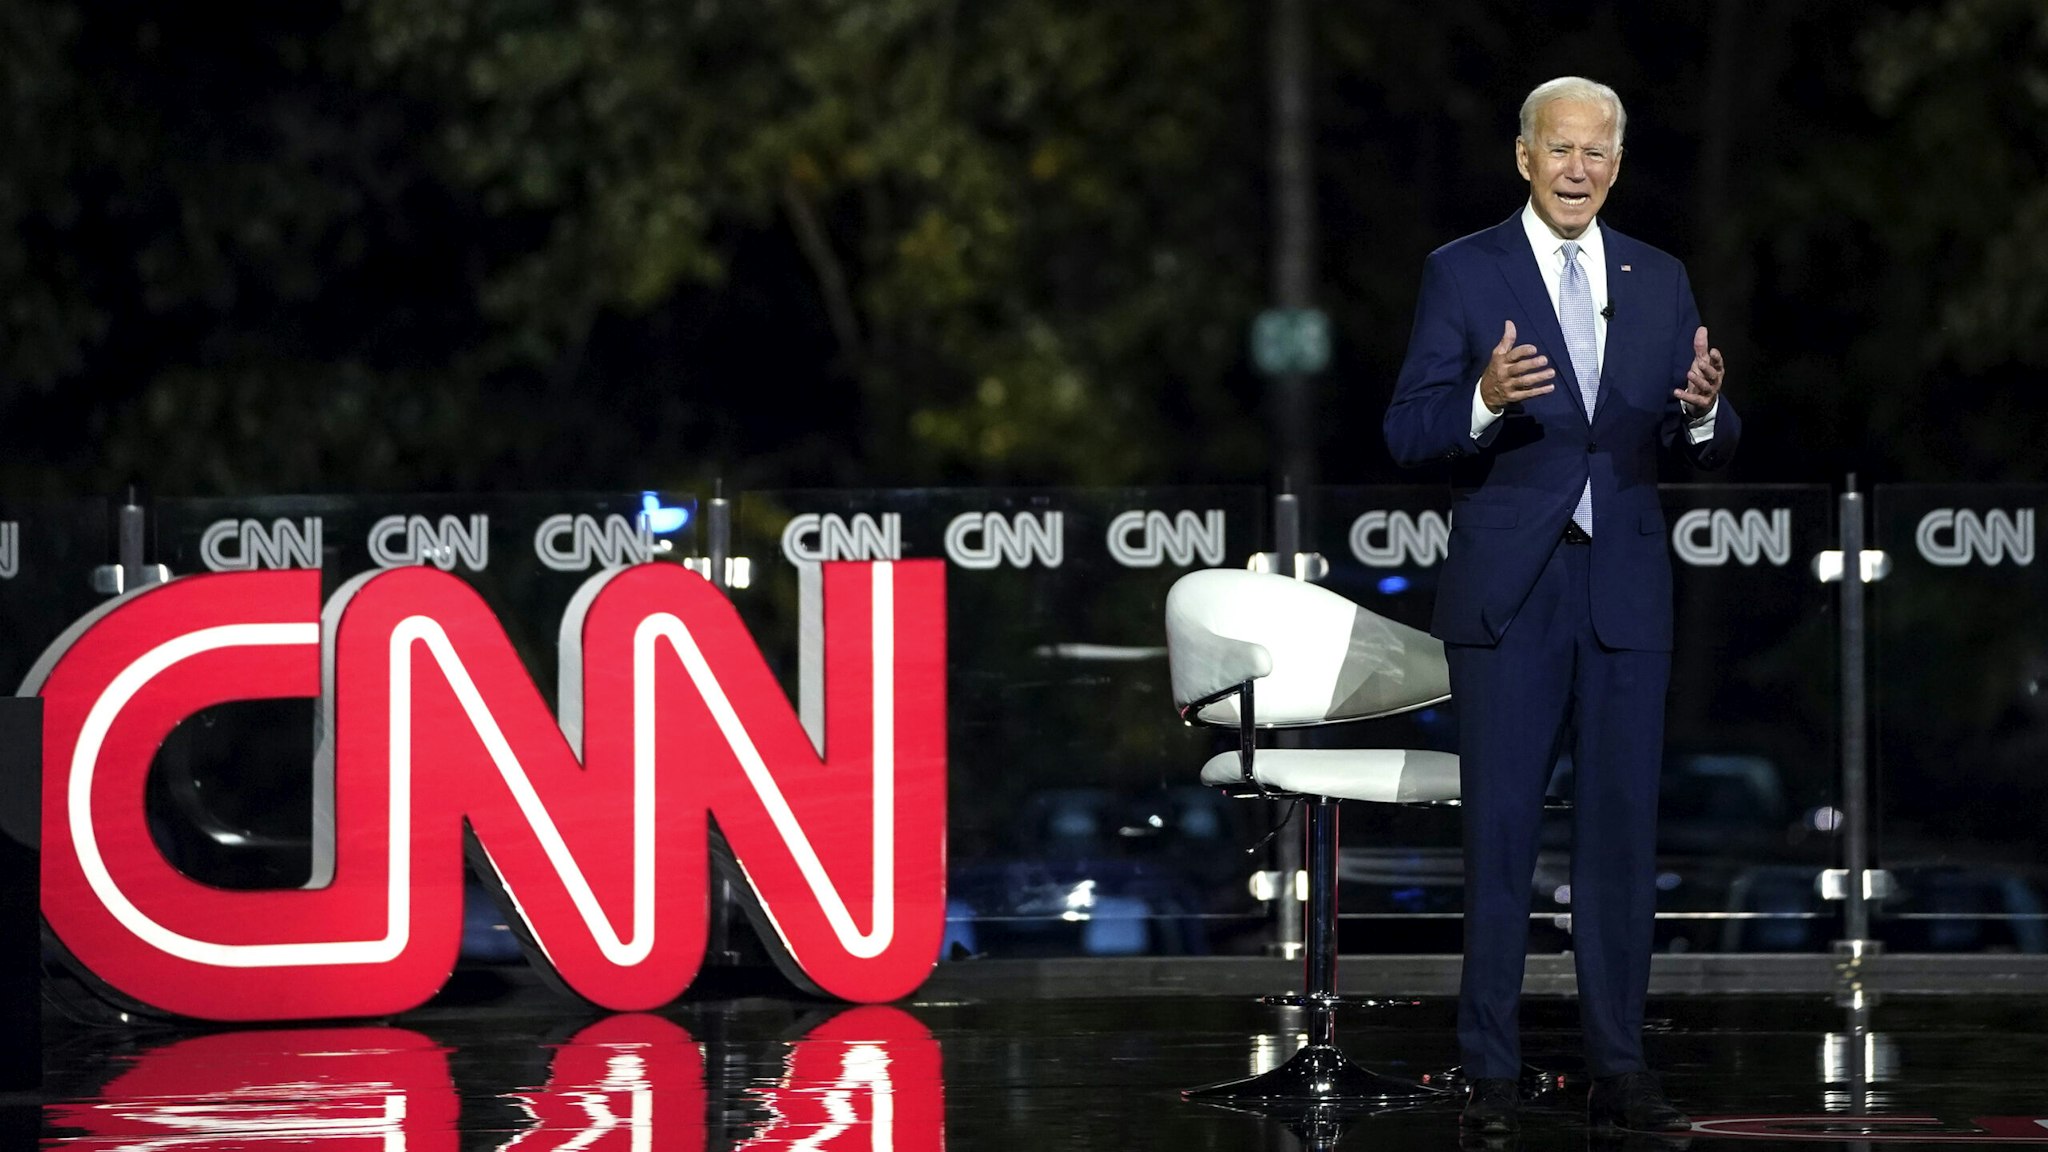 MOOSIC, PA - SEPTEMBER 17: Democratic presidential nominee and former Vice President Joe Biden participates in a CNN town hall event on September 17, 2020 in Moosic, Pennsylvania. Due to the coronavirus, the event is being held outside with audience members in their cars. Biden grew up nearby in Scranton, Pennsylvania.